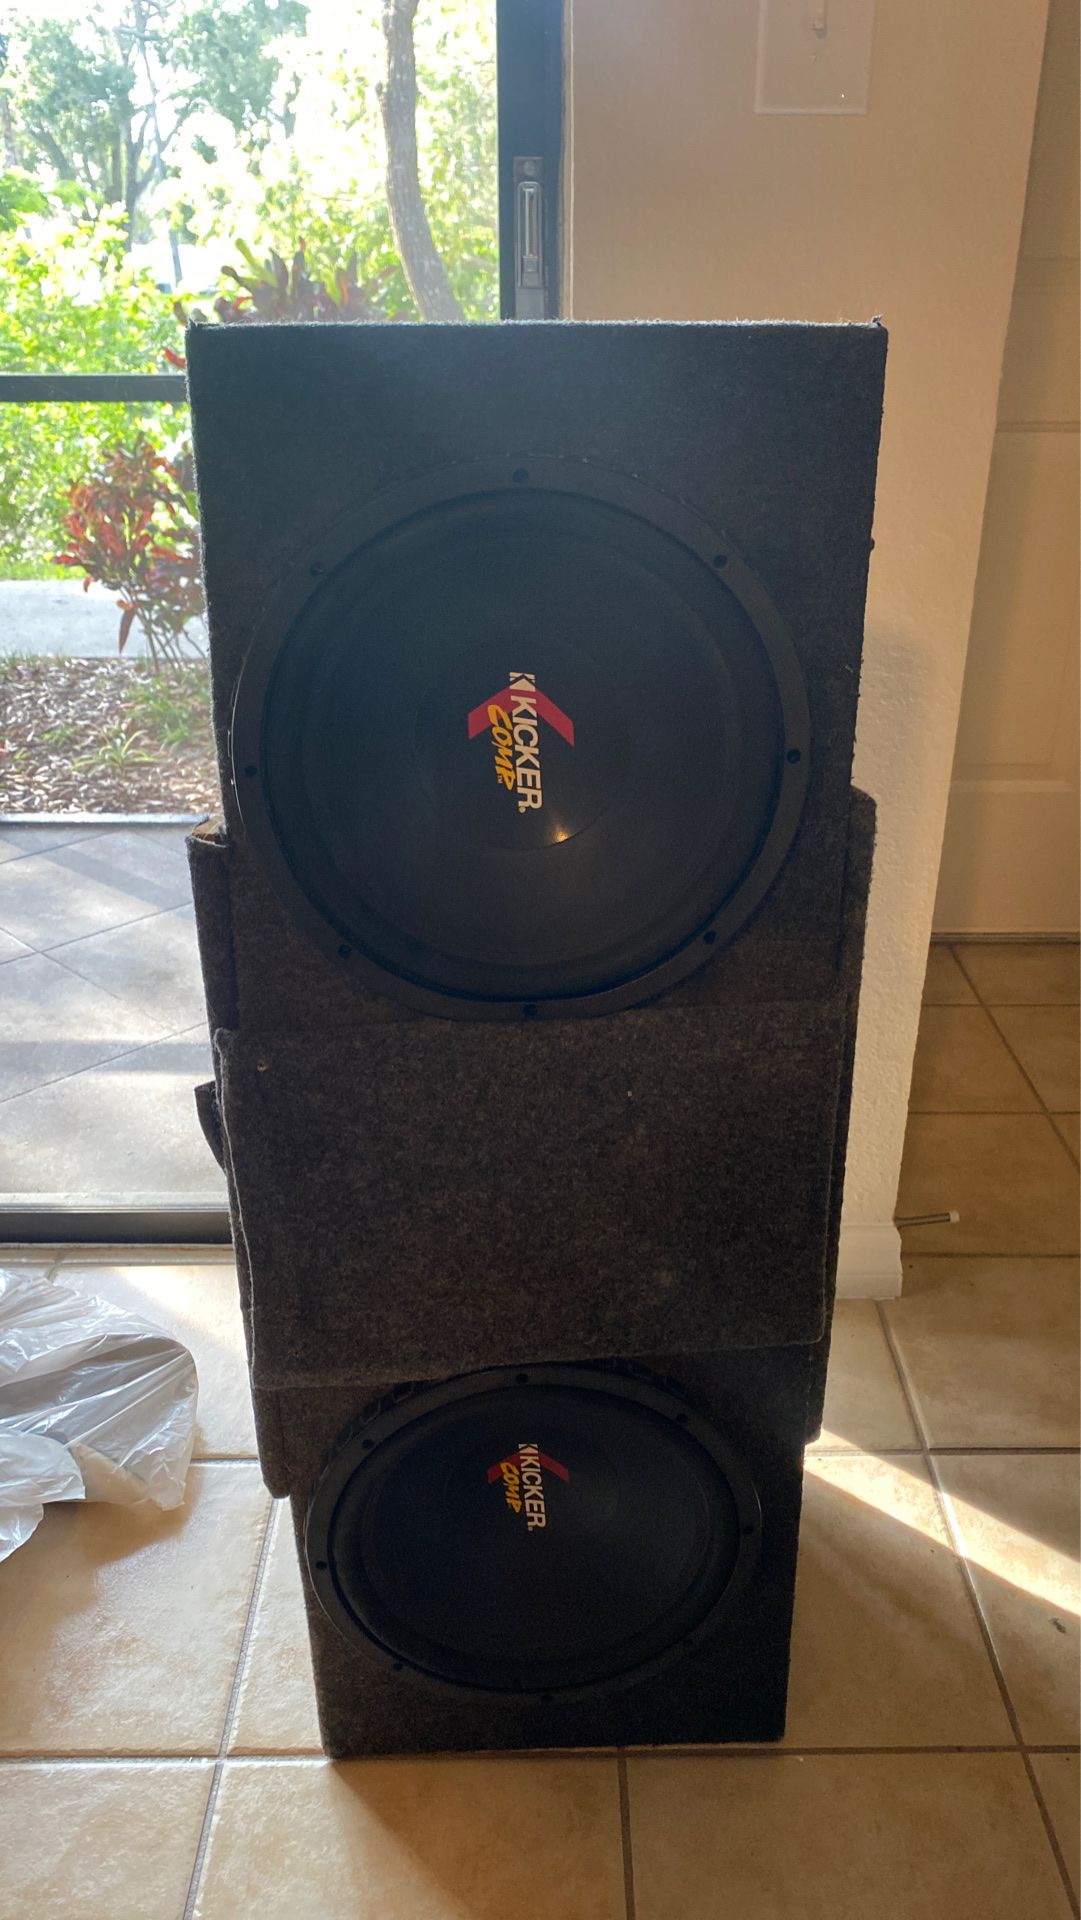 Two 12s subwoofers kickers